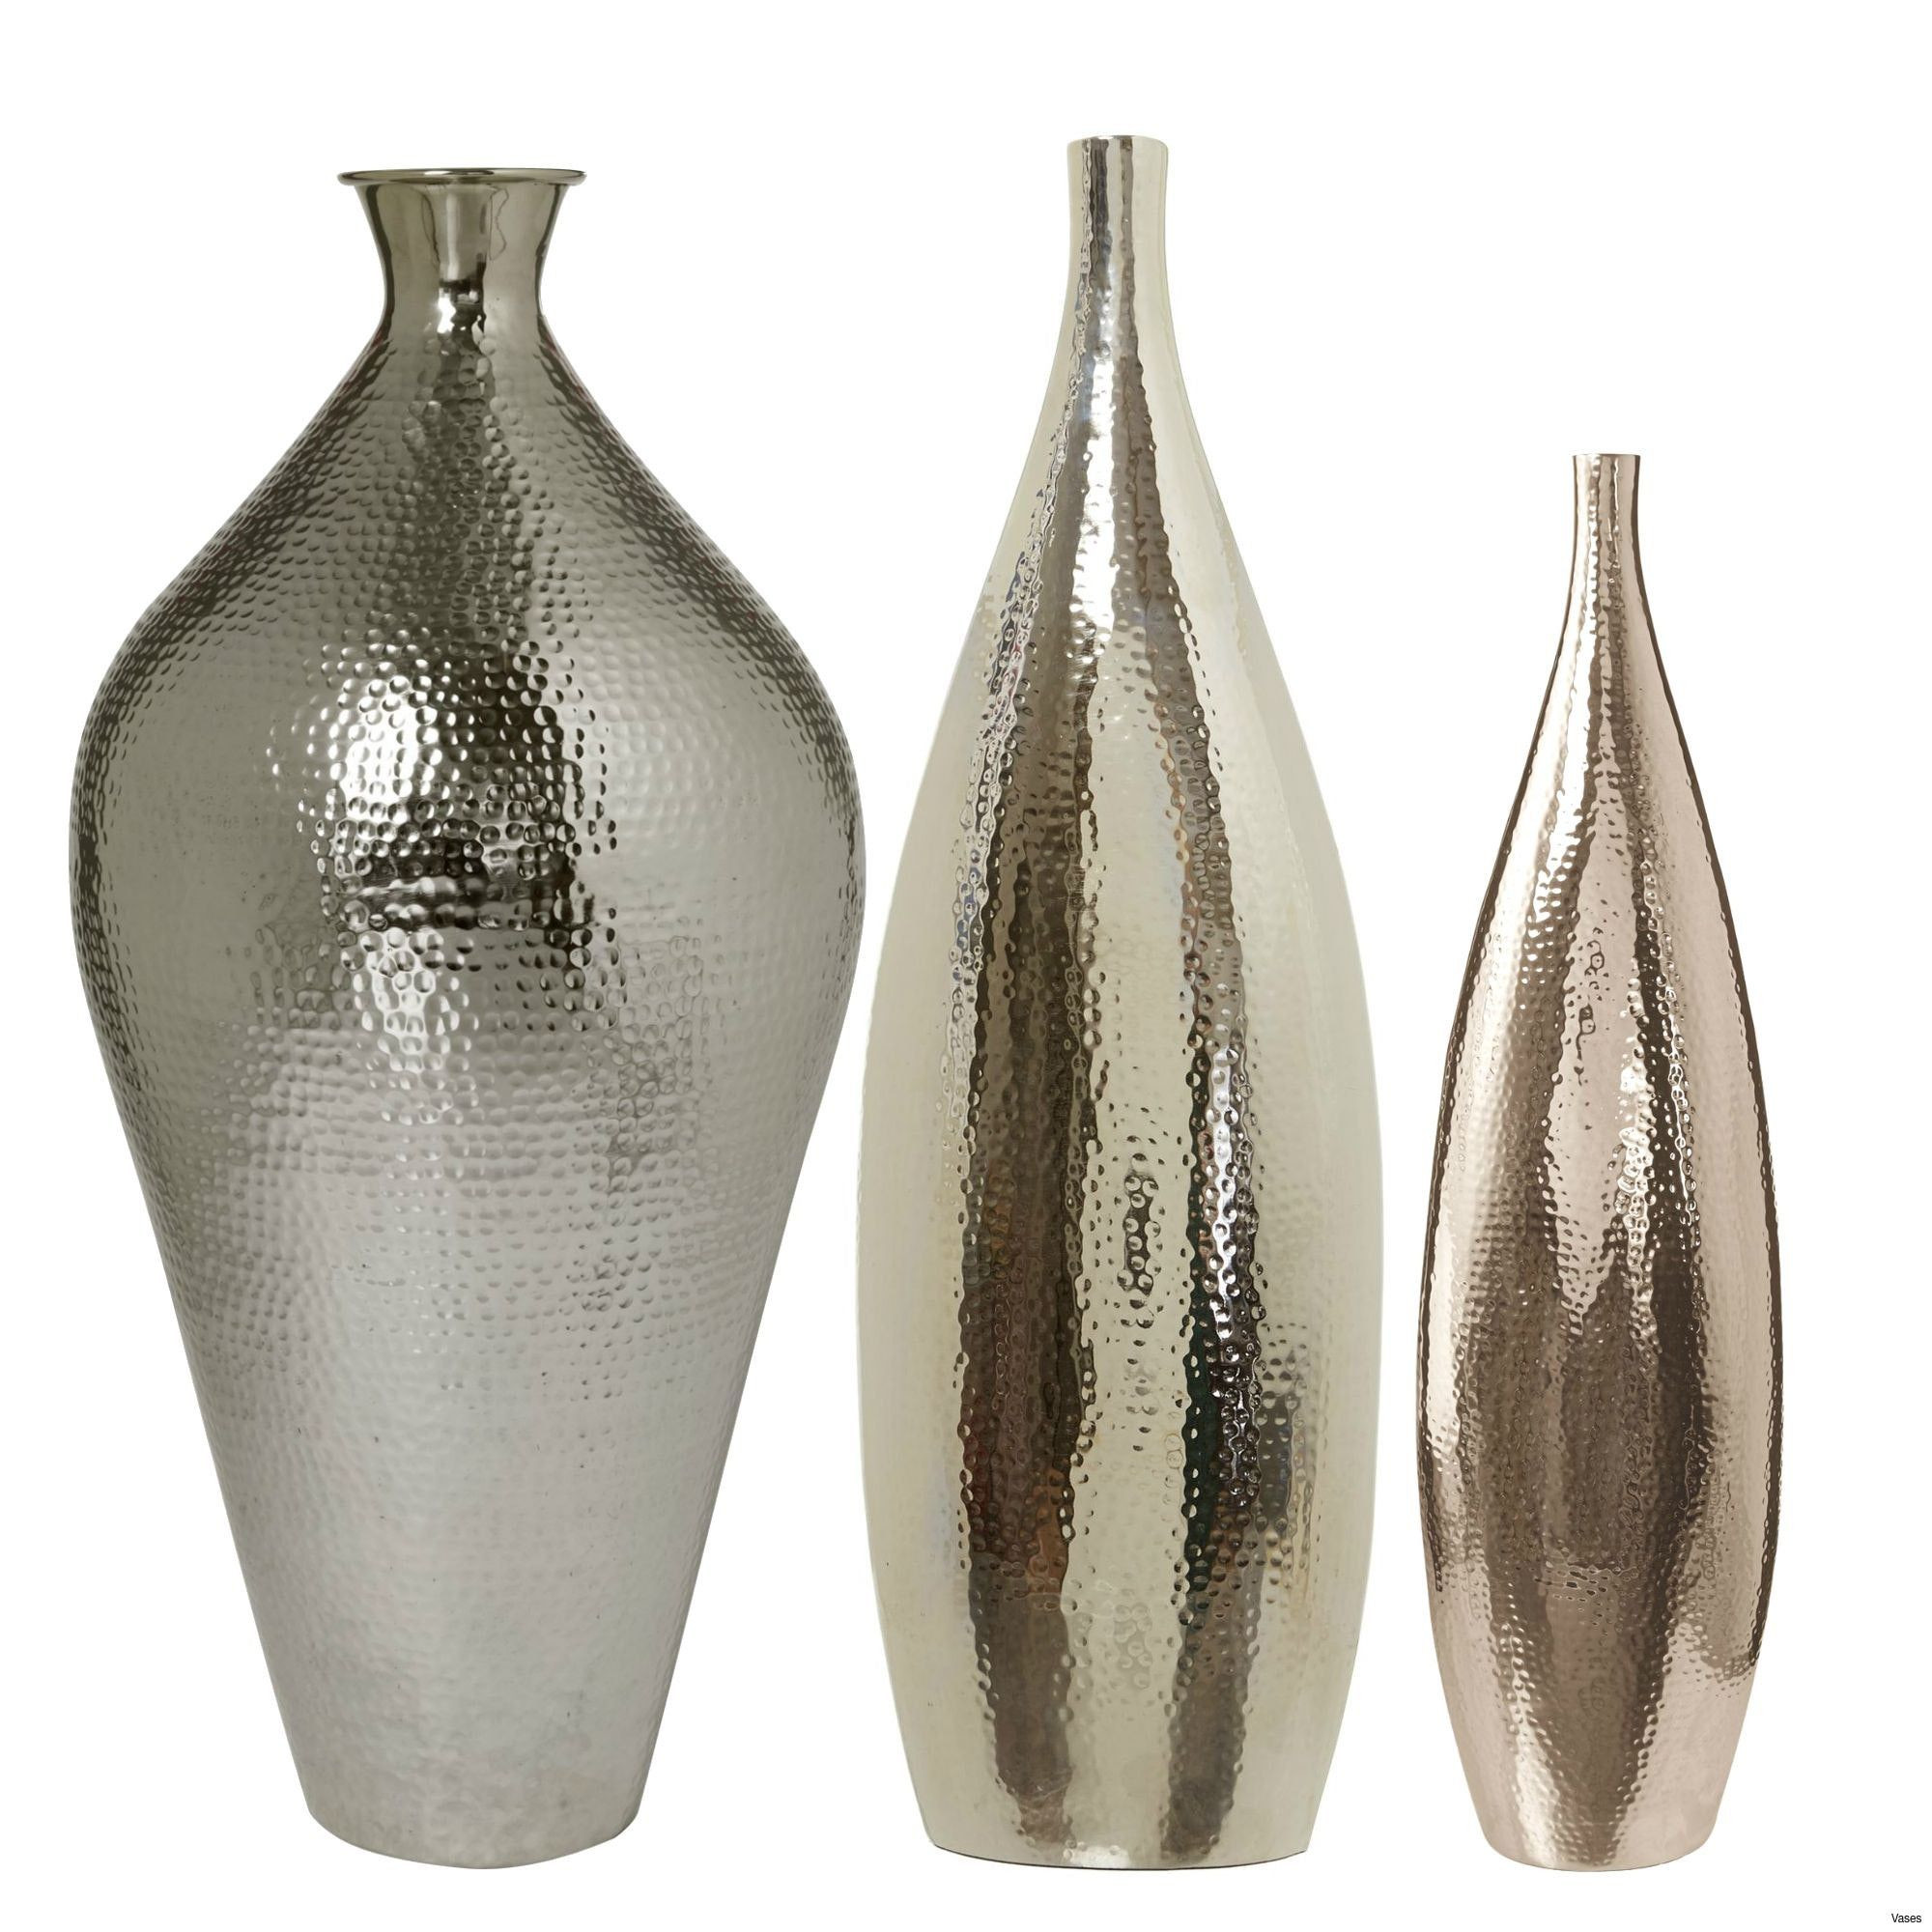 27 Lovable Galvanized Metal Vases wholesale 2024 free download galvanized metal vases wholesale of 50 smoked glass vase the weekly world pertaining to 32 unique metal vase